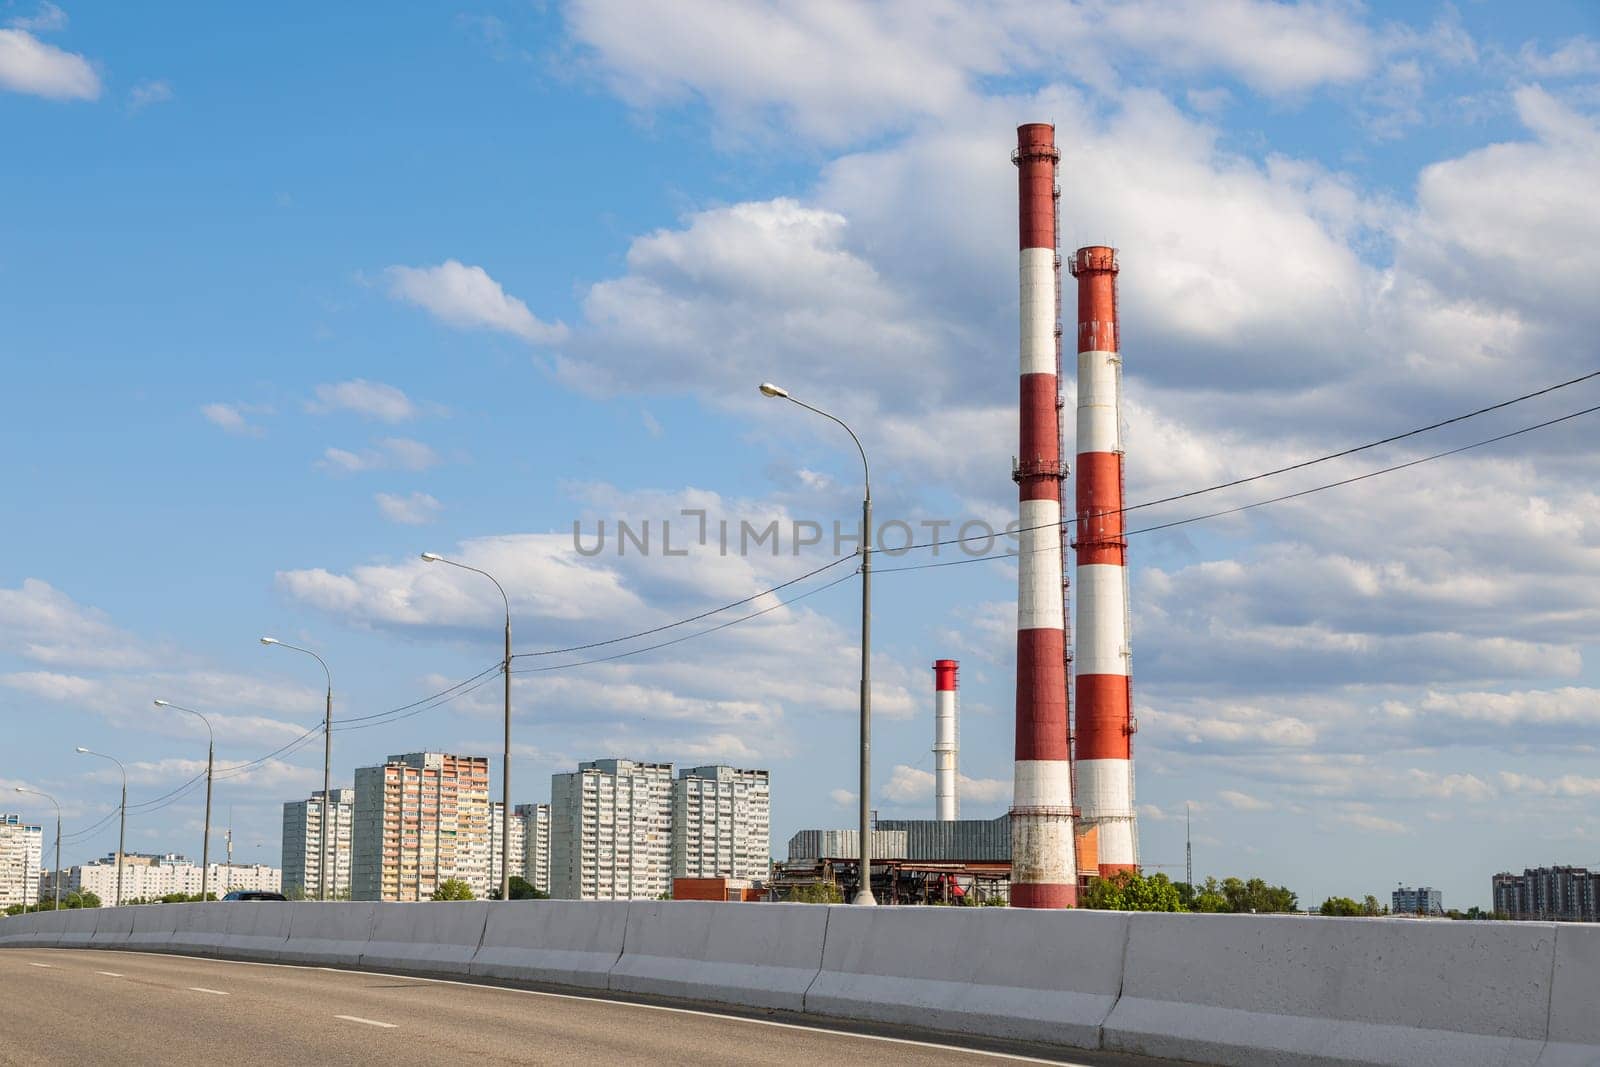 Industrial plant with tall chimneys against the blue sky. by Yurich32